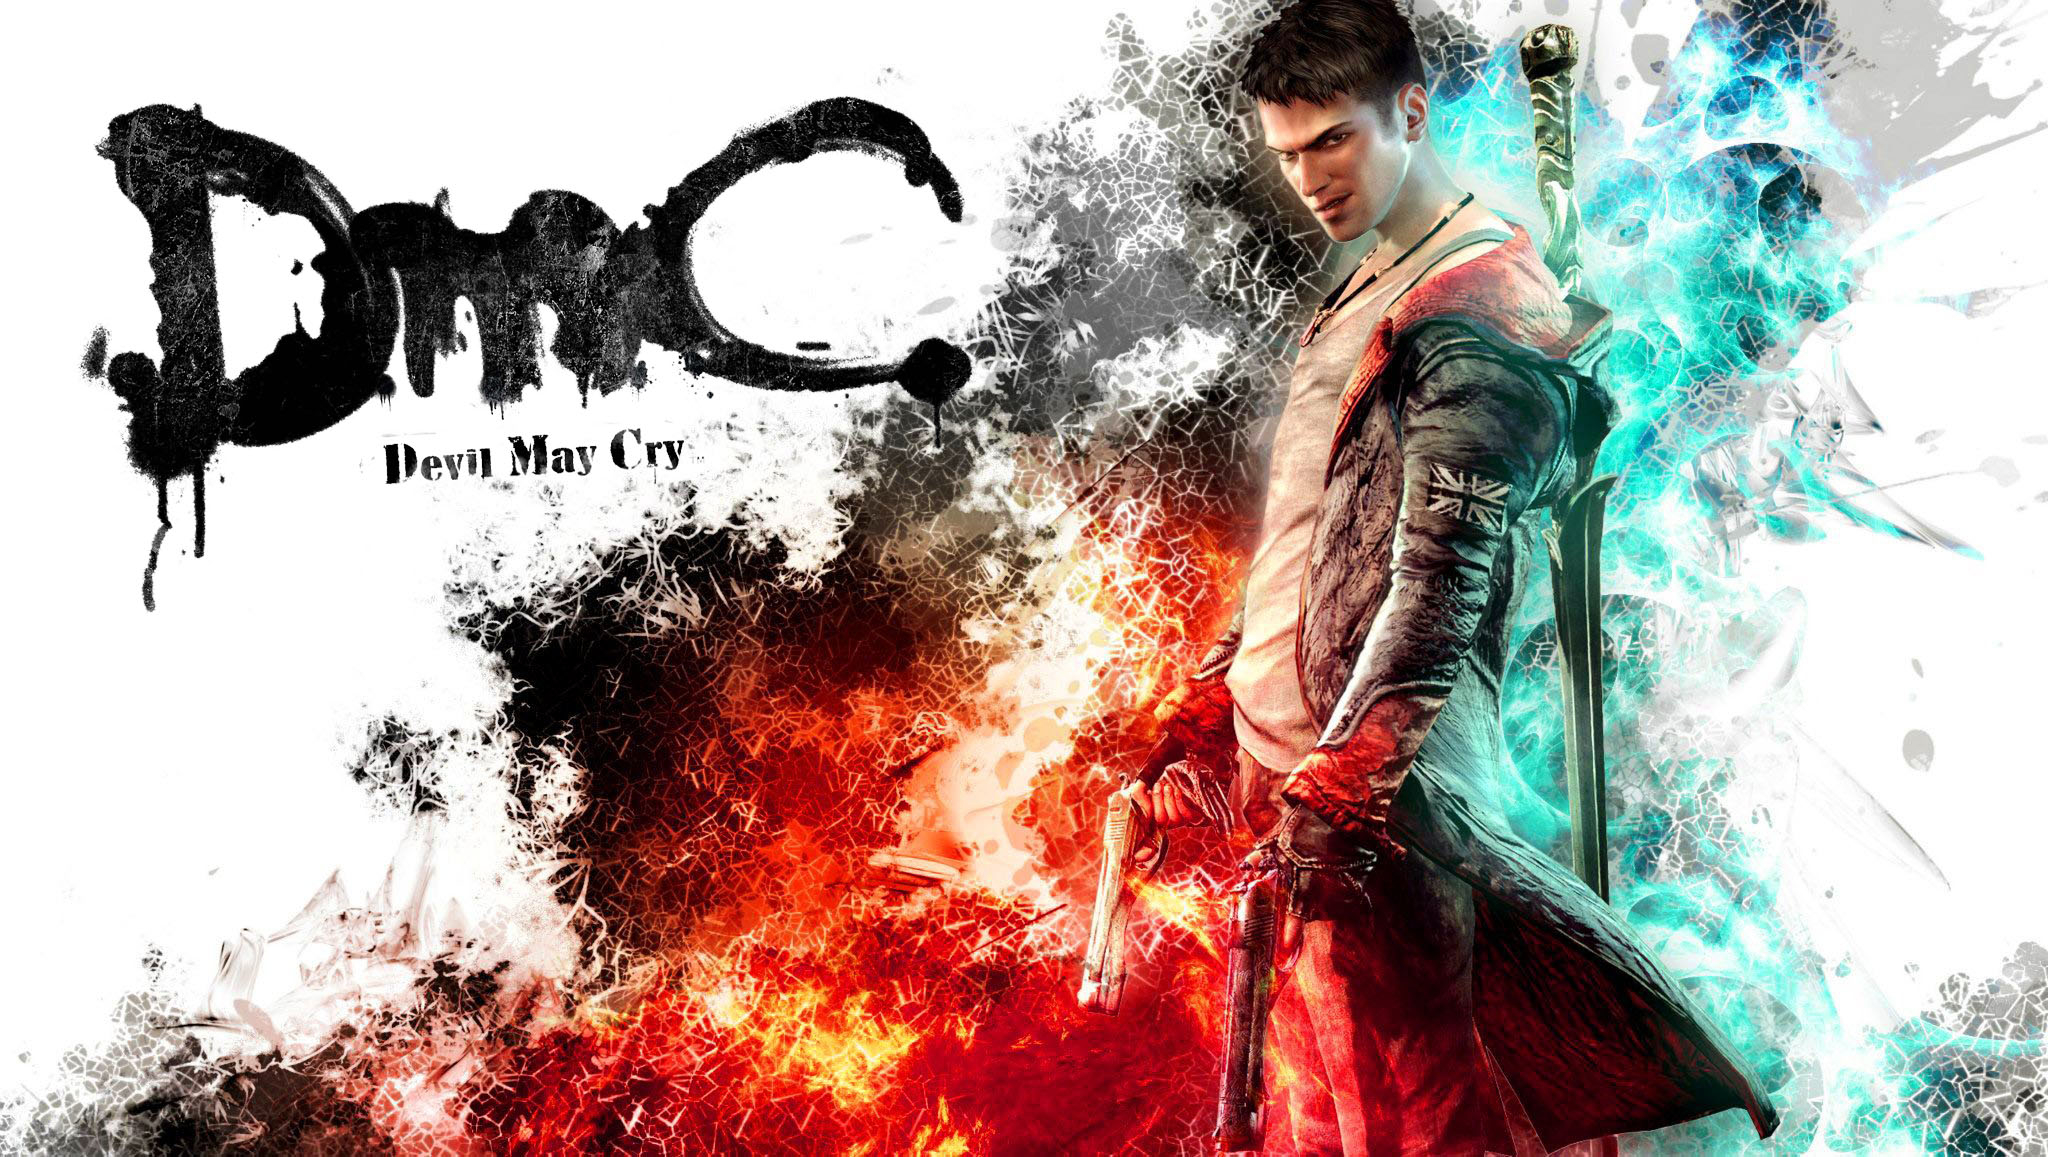 Devil may cry 4 on steam фото 43